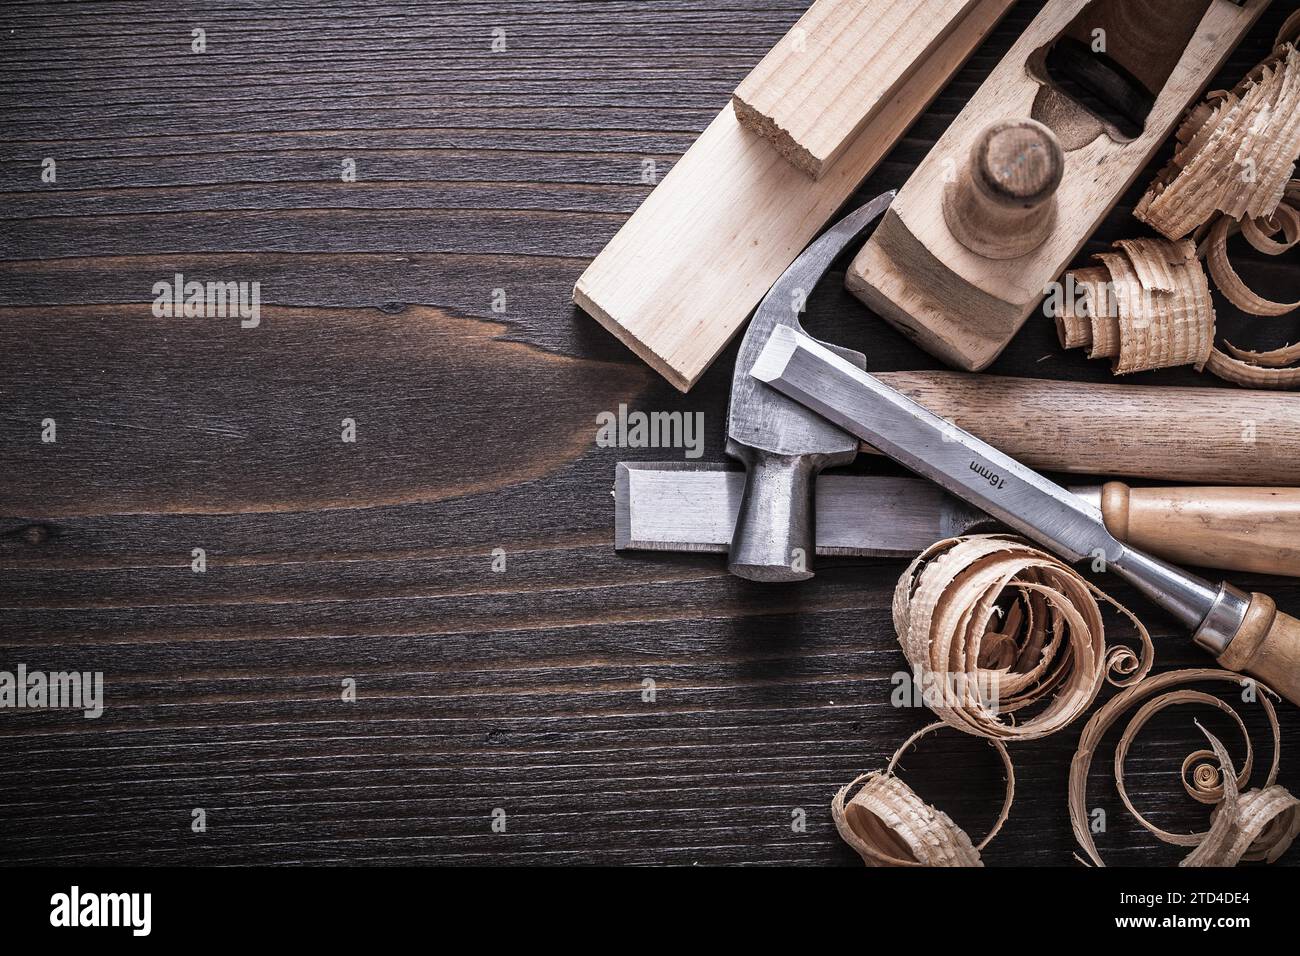 Planner claw hammer fixed chisel wooden bricks and curled shavings on vintage wooden board Building concept Stock Photo